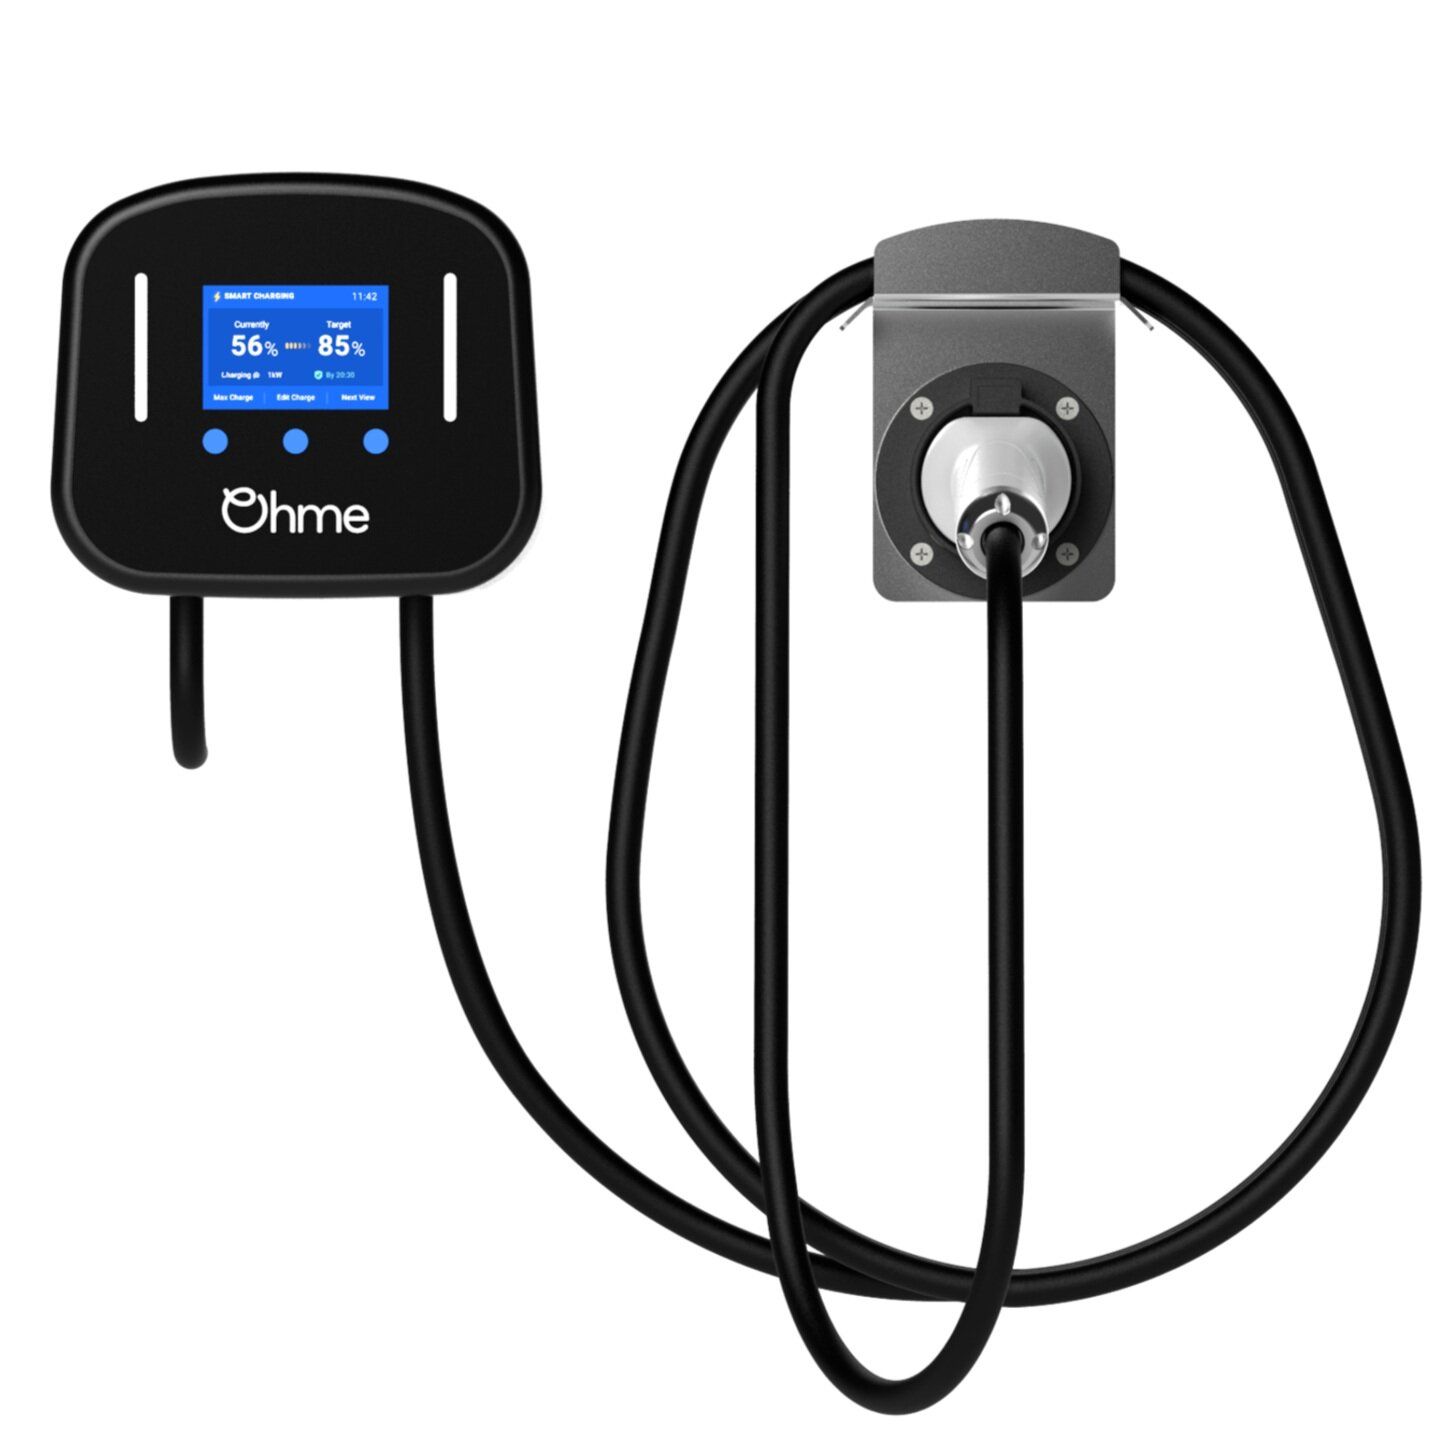 Ohme Home pro type 2